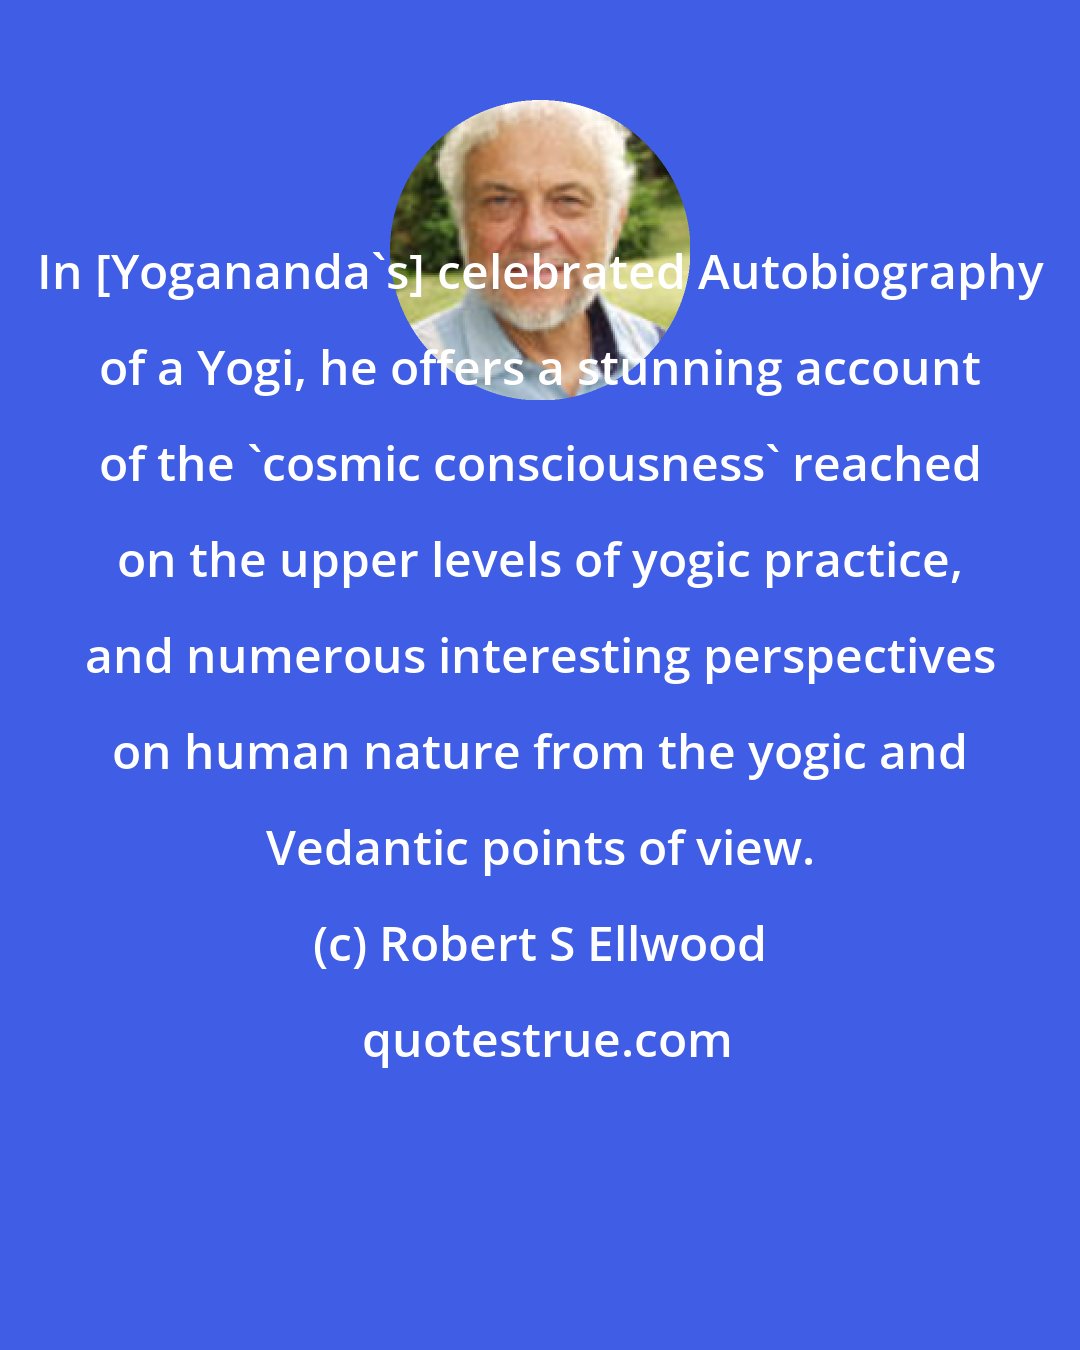 Robert S Ellwood: In [Yogananda's] celebrated Autobiography of a Yogi, he offers a stunning account of the 'cosmic consciousness' reached on the upper levels of yogic practice, and numerous interesting perspectives on human nature from the yogic and Vedantic points of view.